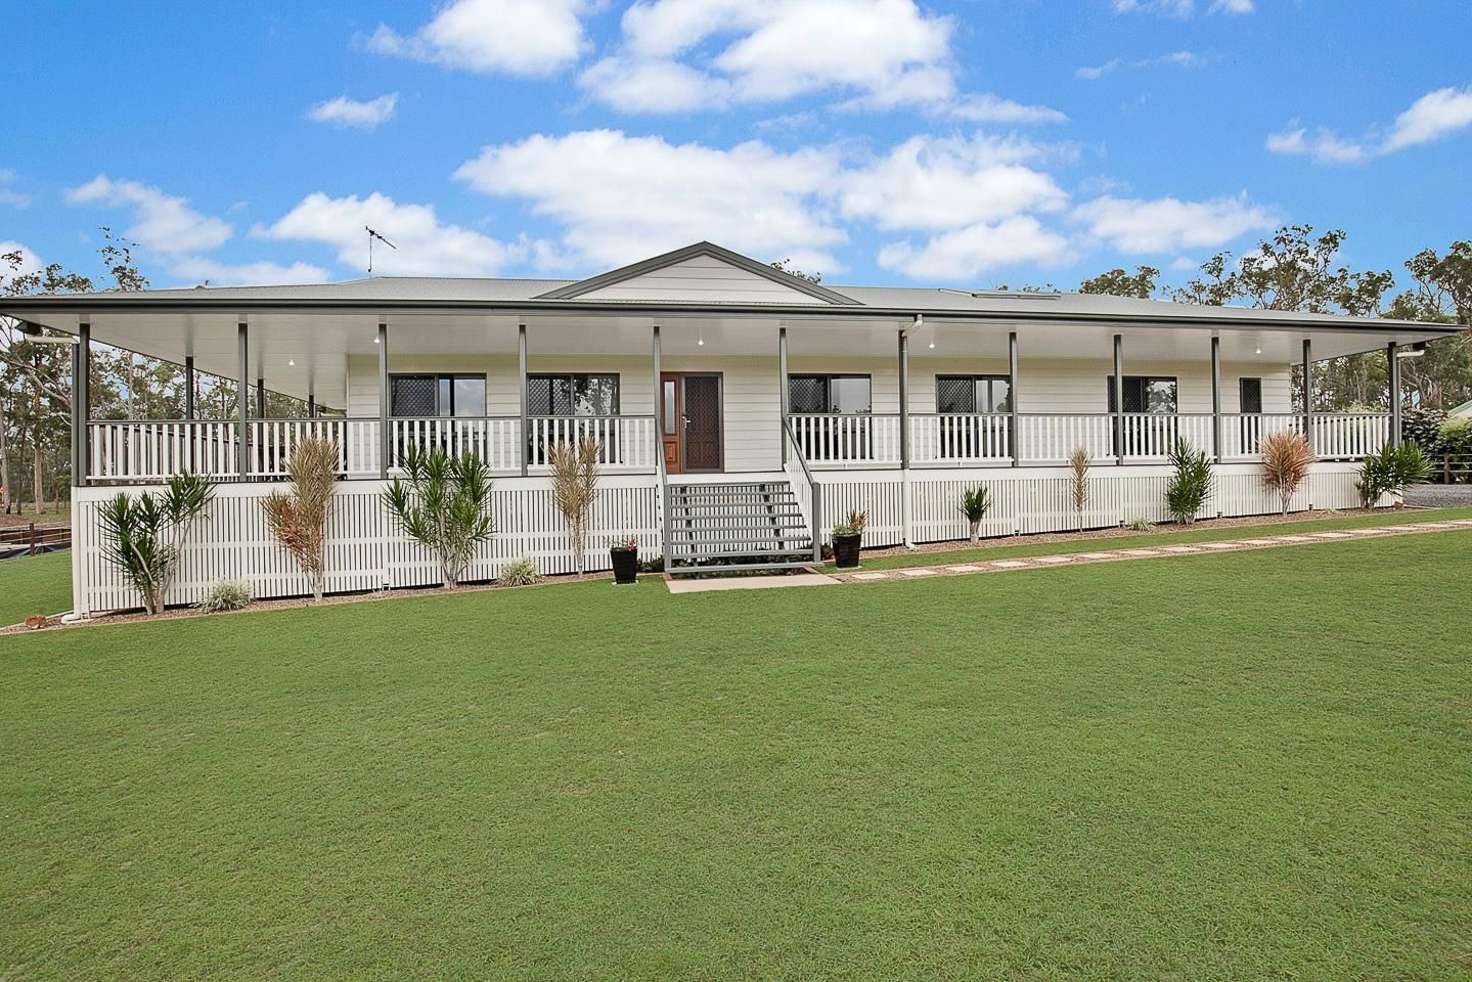 Main view of Homely house listing, 141 PARK AVENUE, North Isis QLD 4660